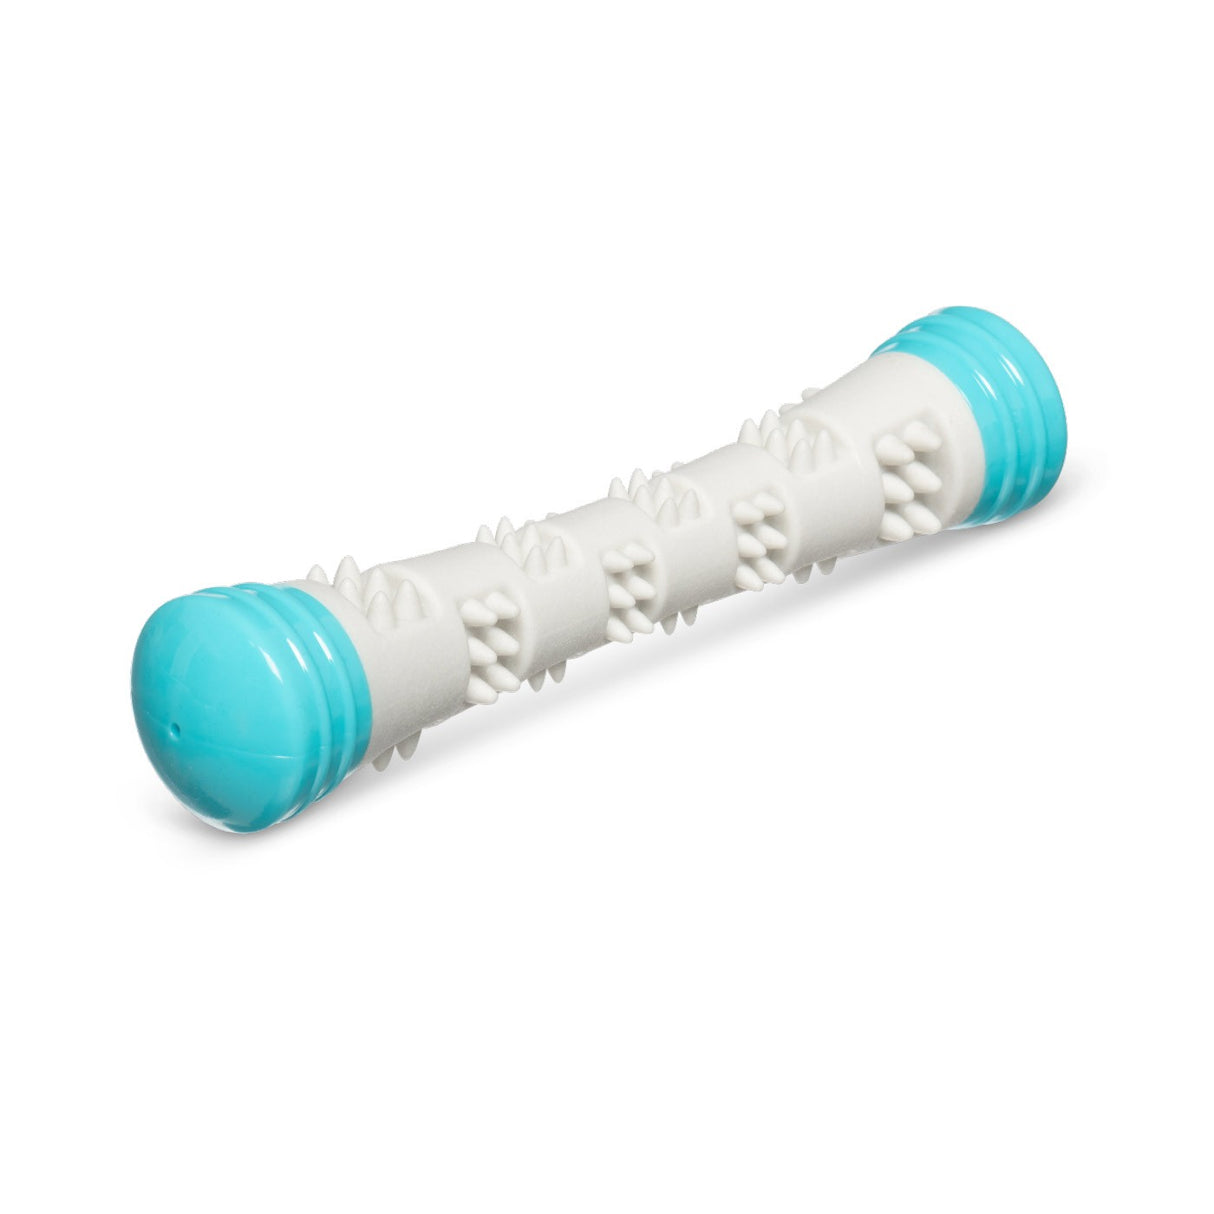 Totally Pooched Chew N' Squeak Stick Dog Toy